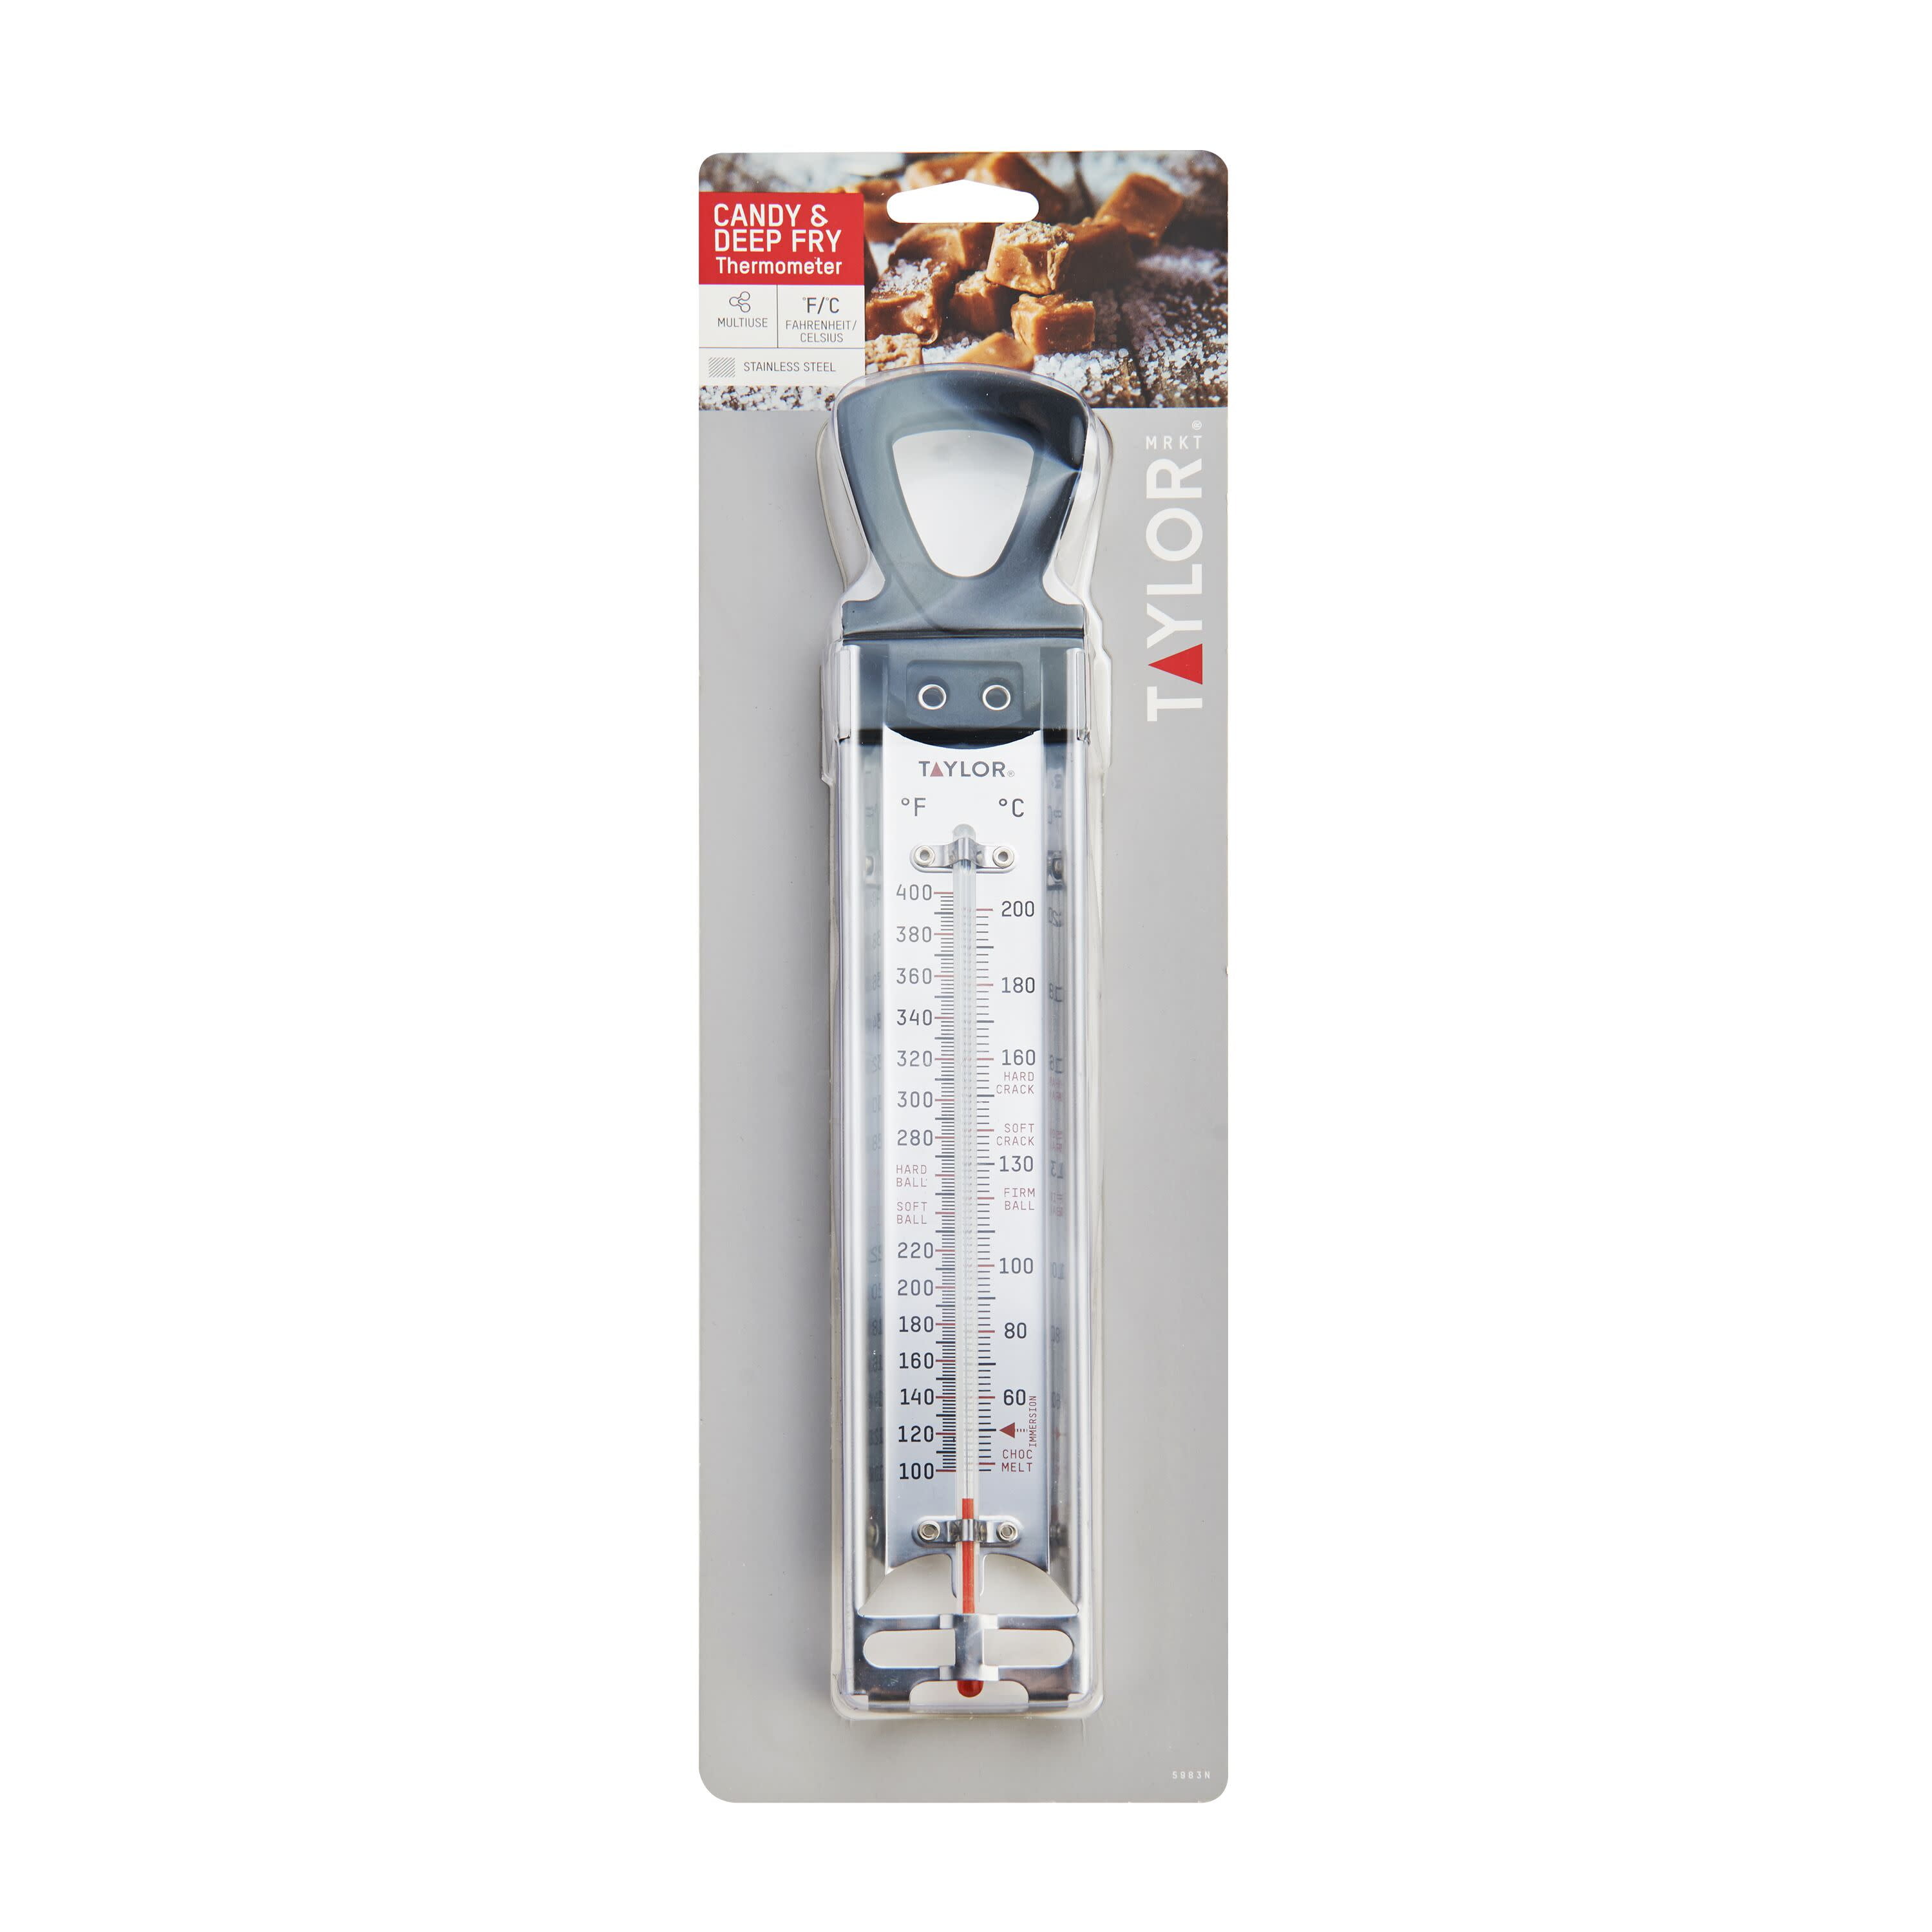 Taylor Premium Digital Candy Fry Thermometer with Heat Shield